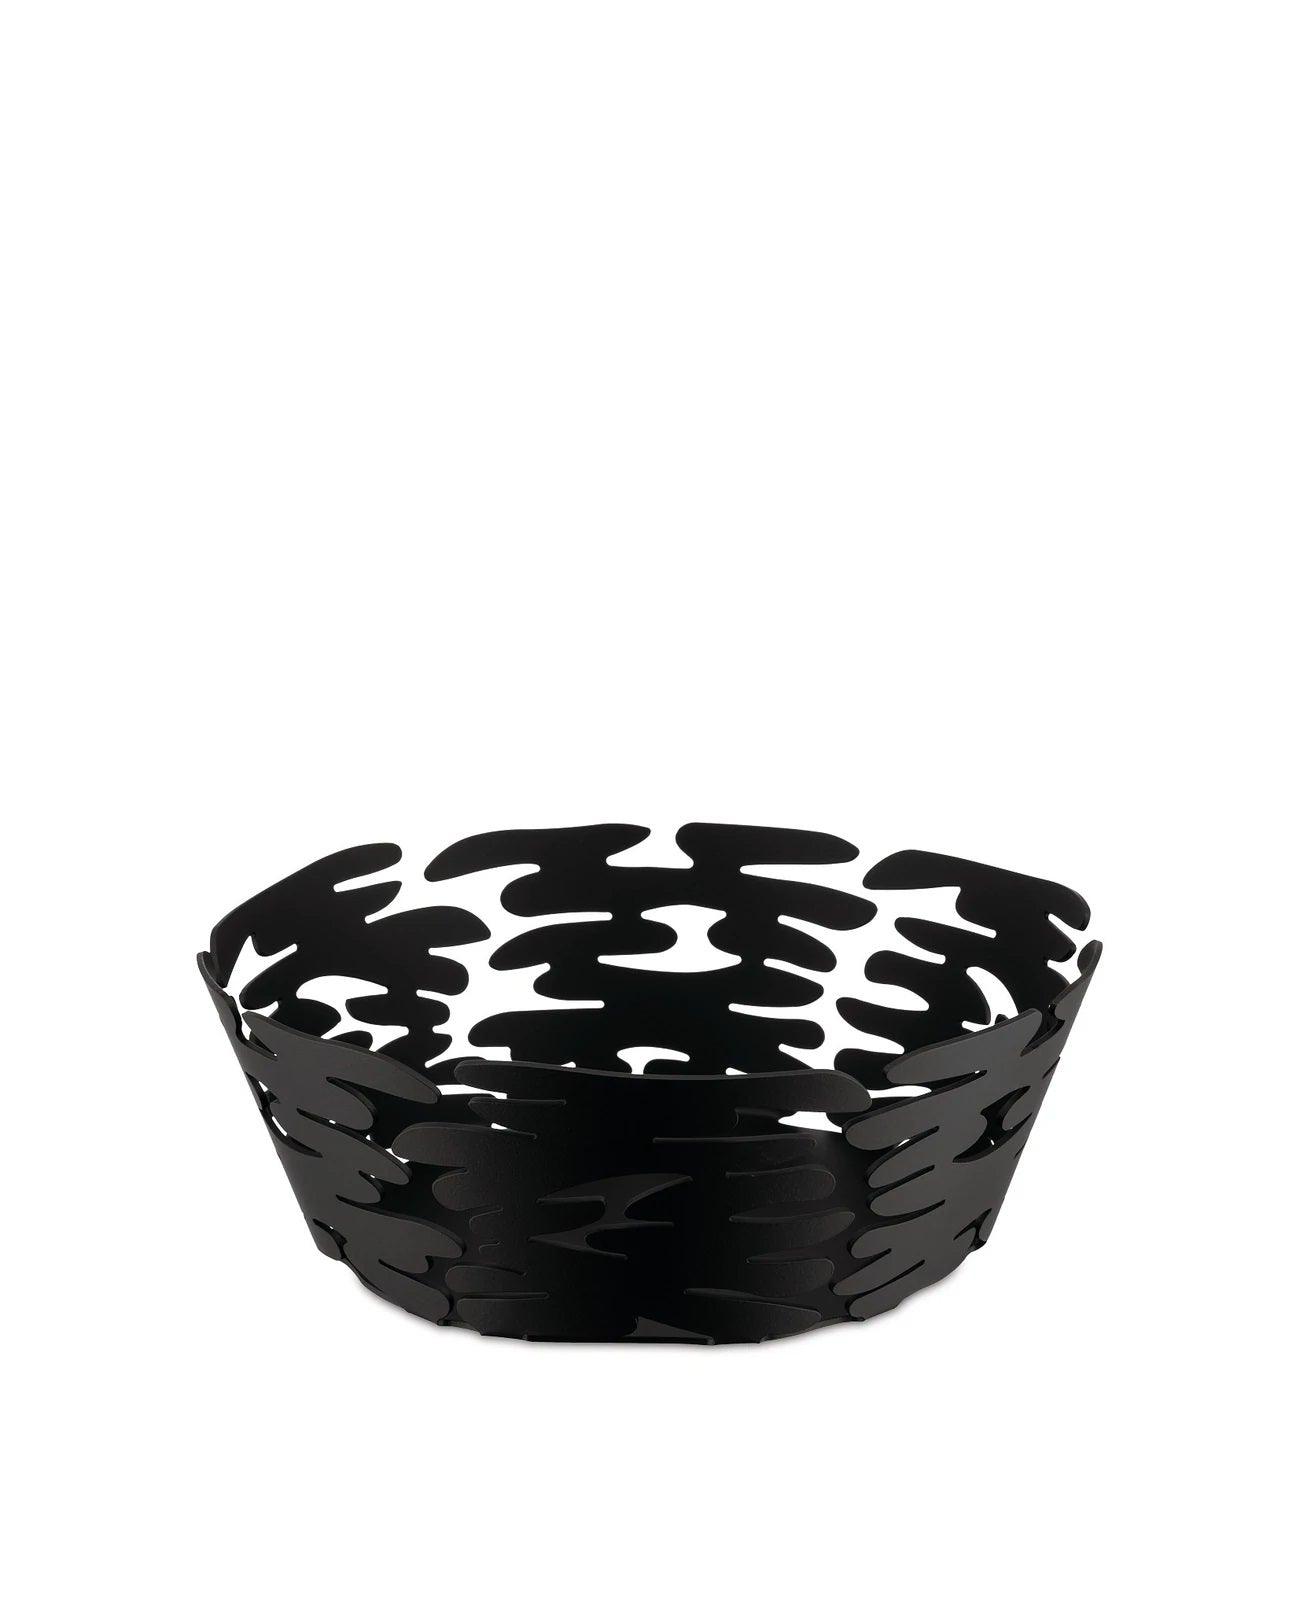 Alessi Barket Basket with Perforated Decoration